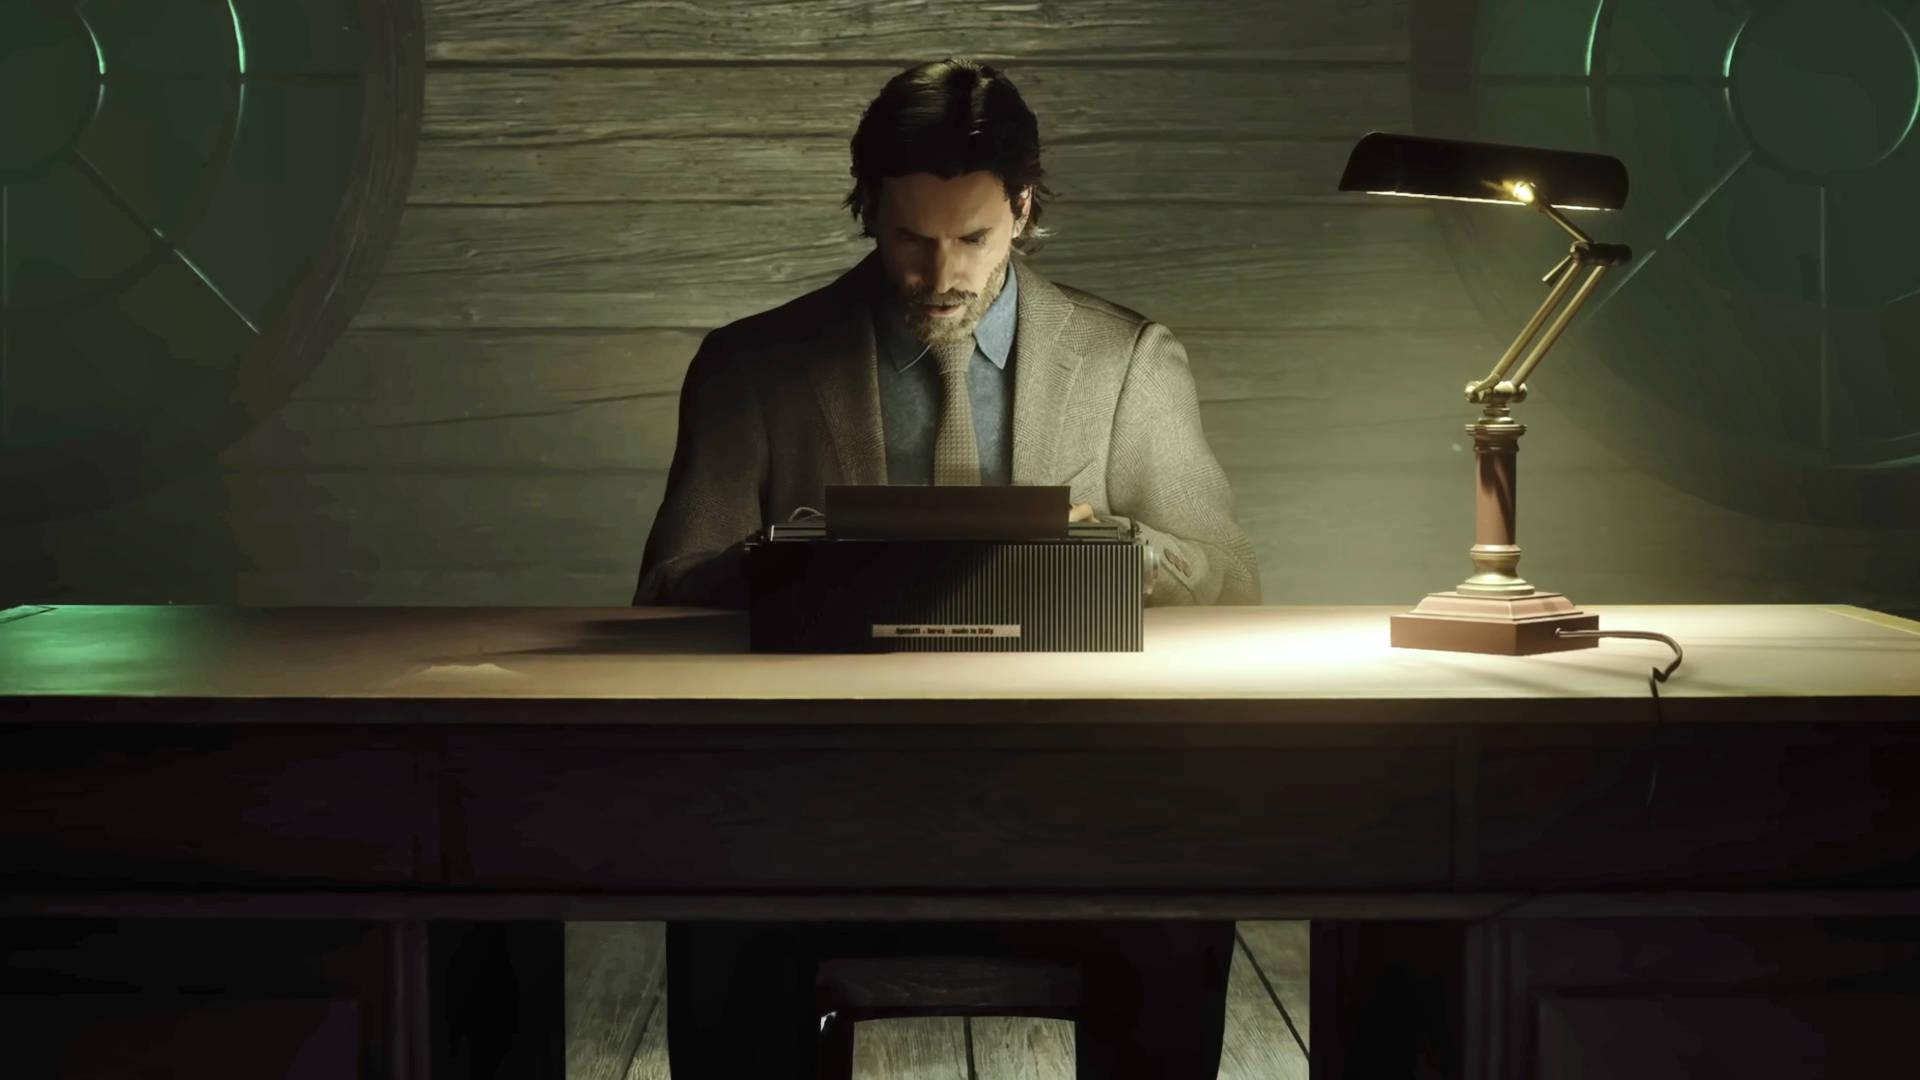 Alan Wake 2 release date, trailers, story, and gameplay